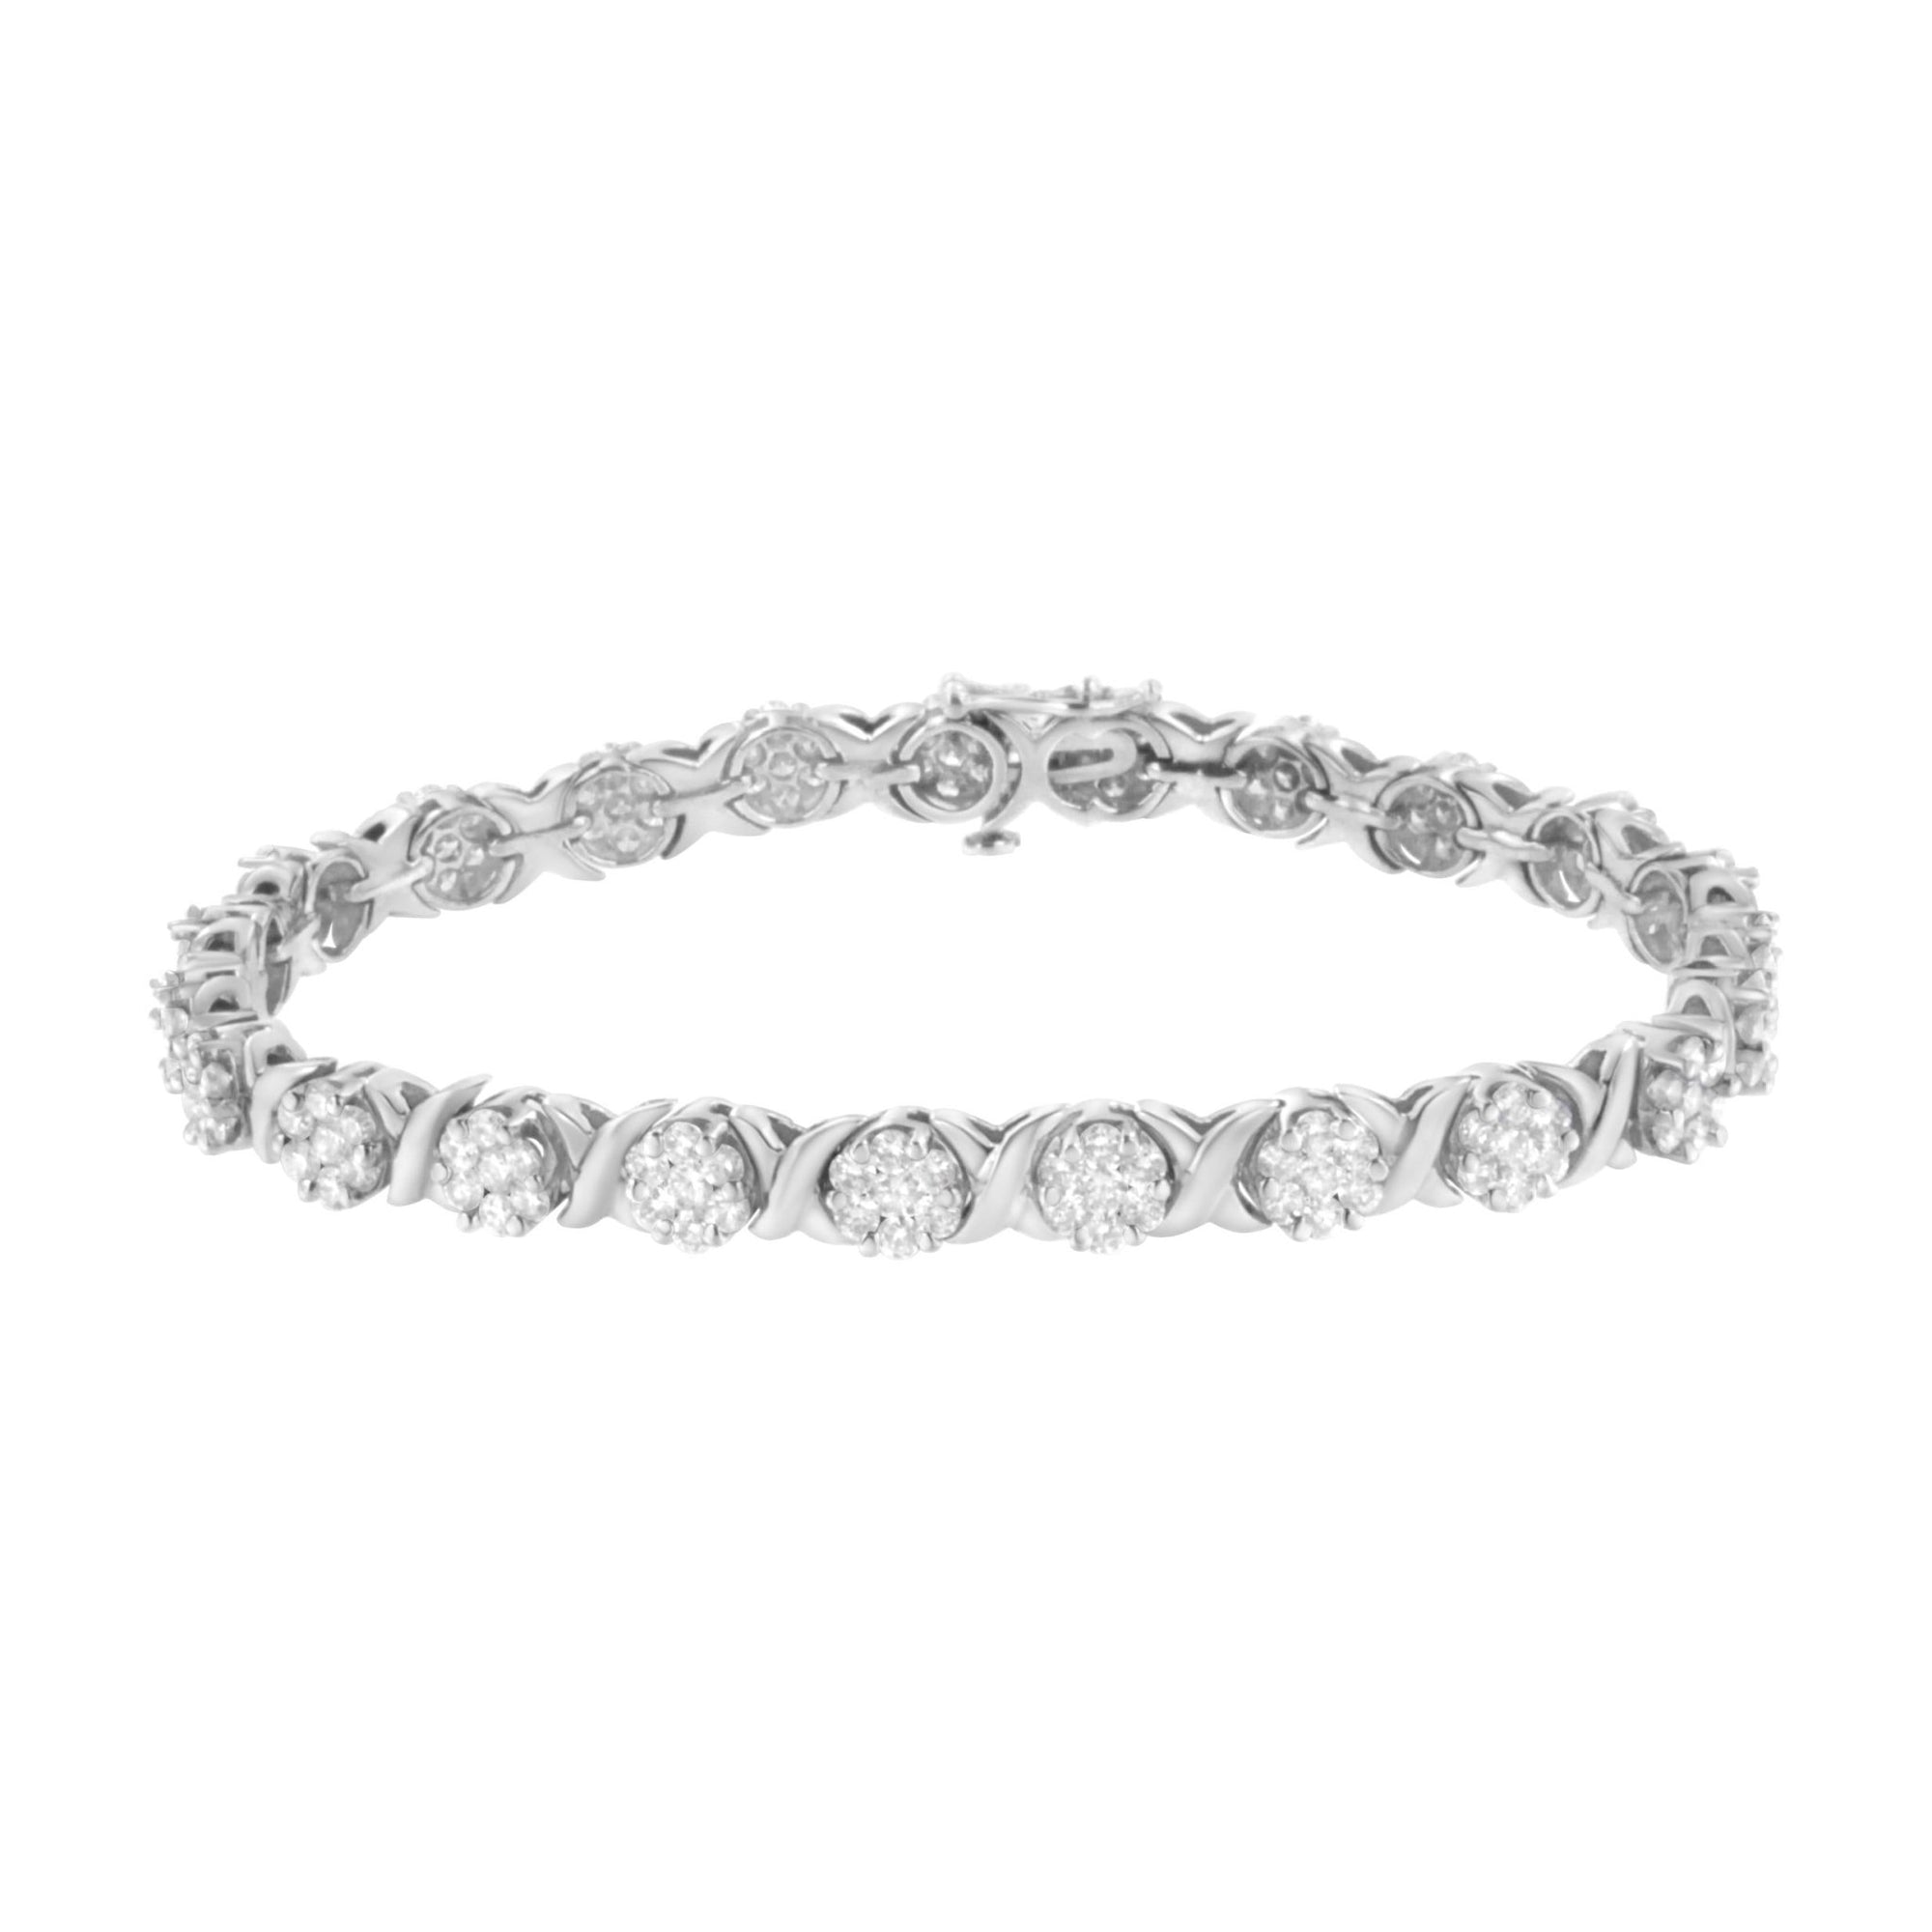 14K White Gold 4 7/8 Cttw Round Brilliant-Cut Diamond Round Cluster & X-Link 7" Tennis Bracelet (I-J Color, SI2-I1 Clarity) - LinkagejewelrydesignLinkagejewelrydesign